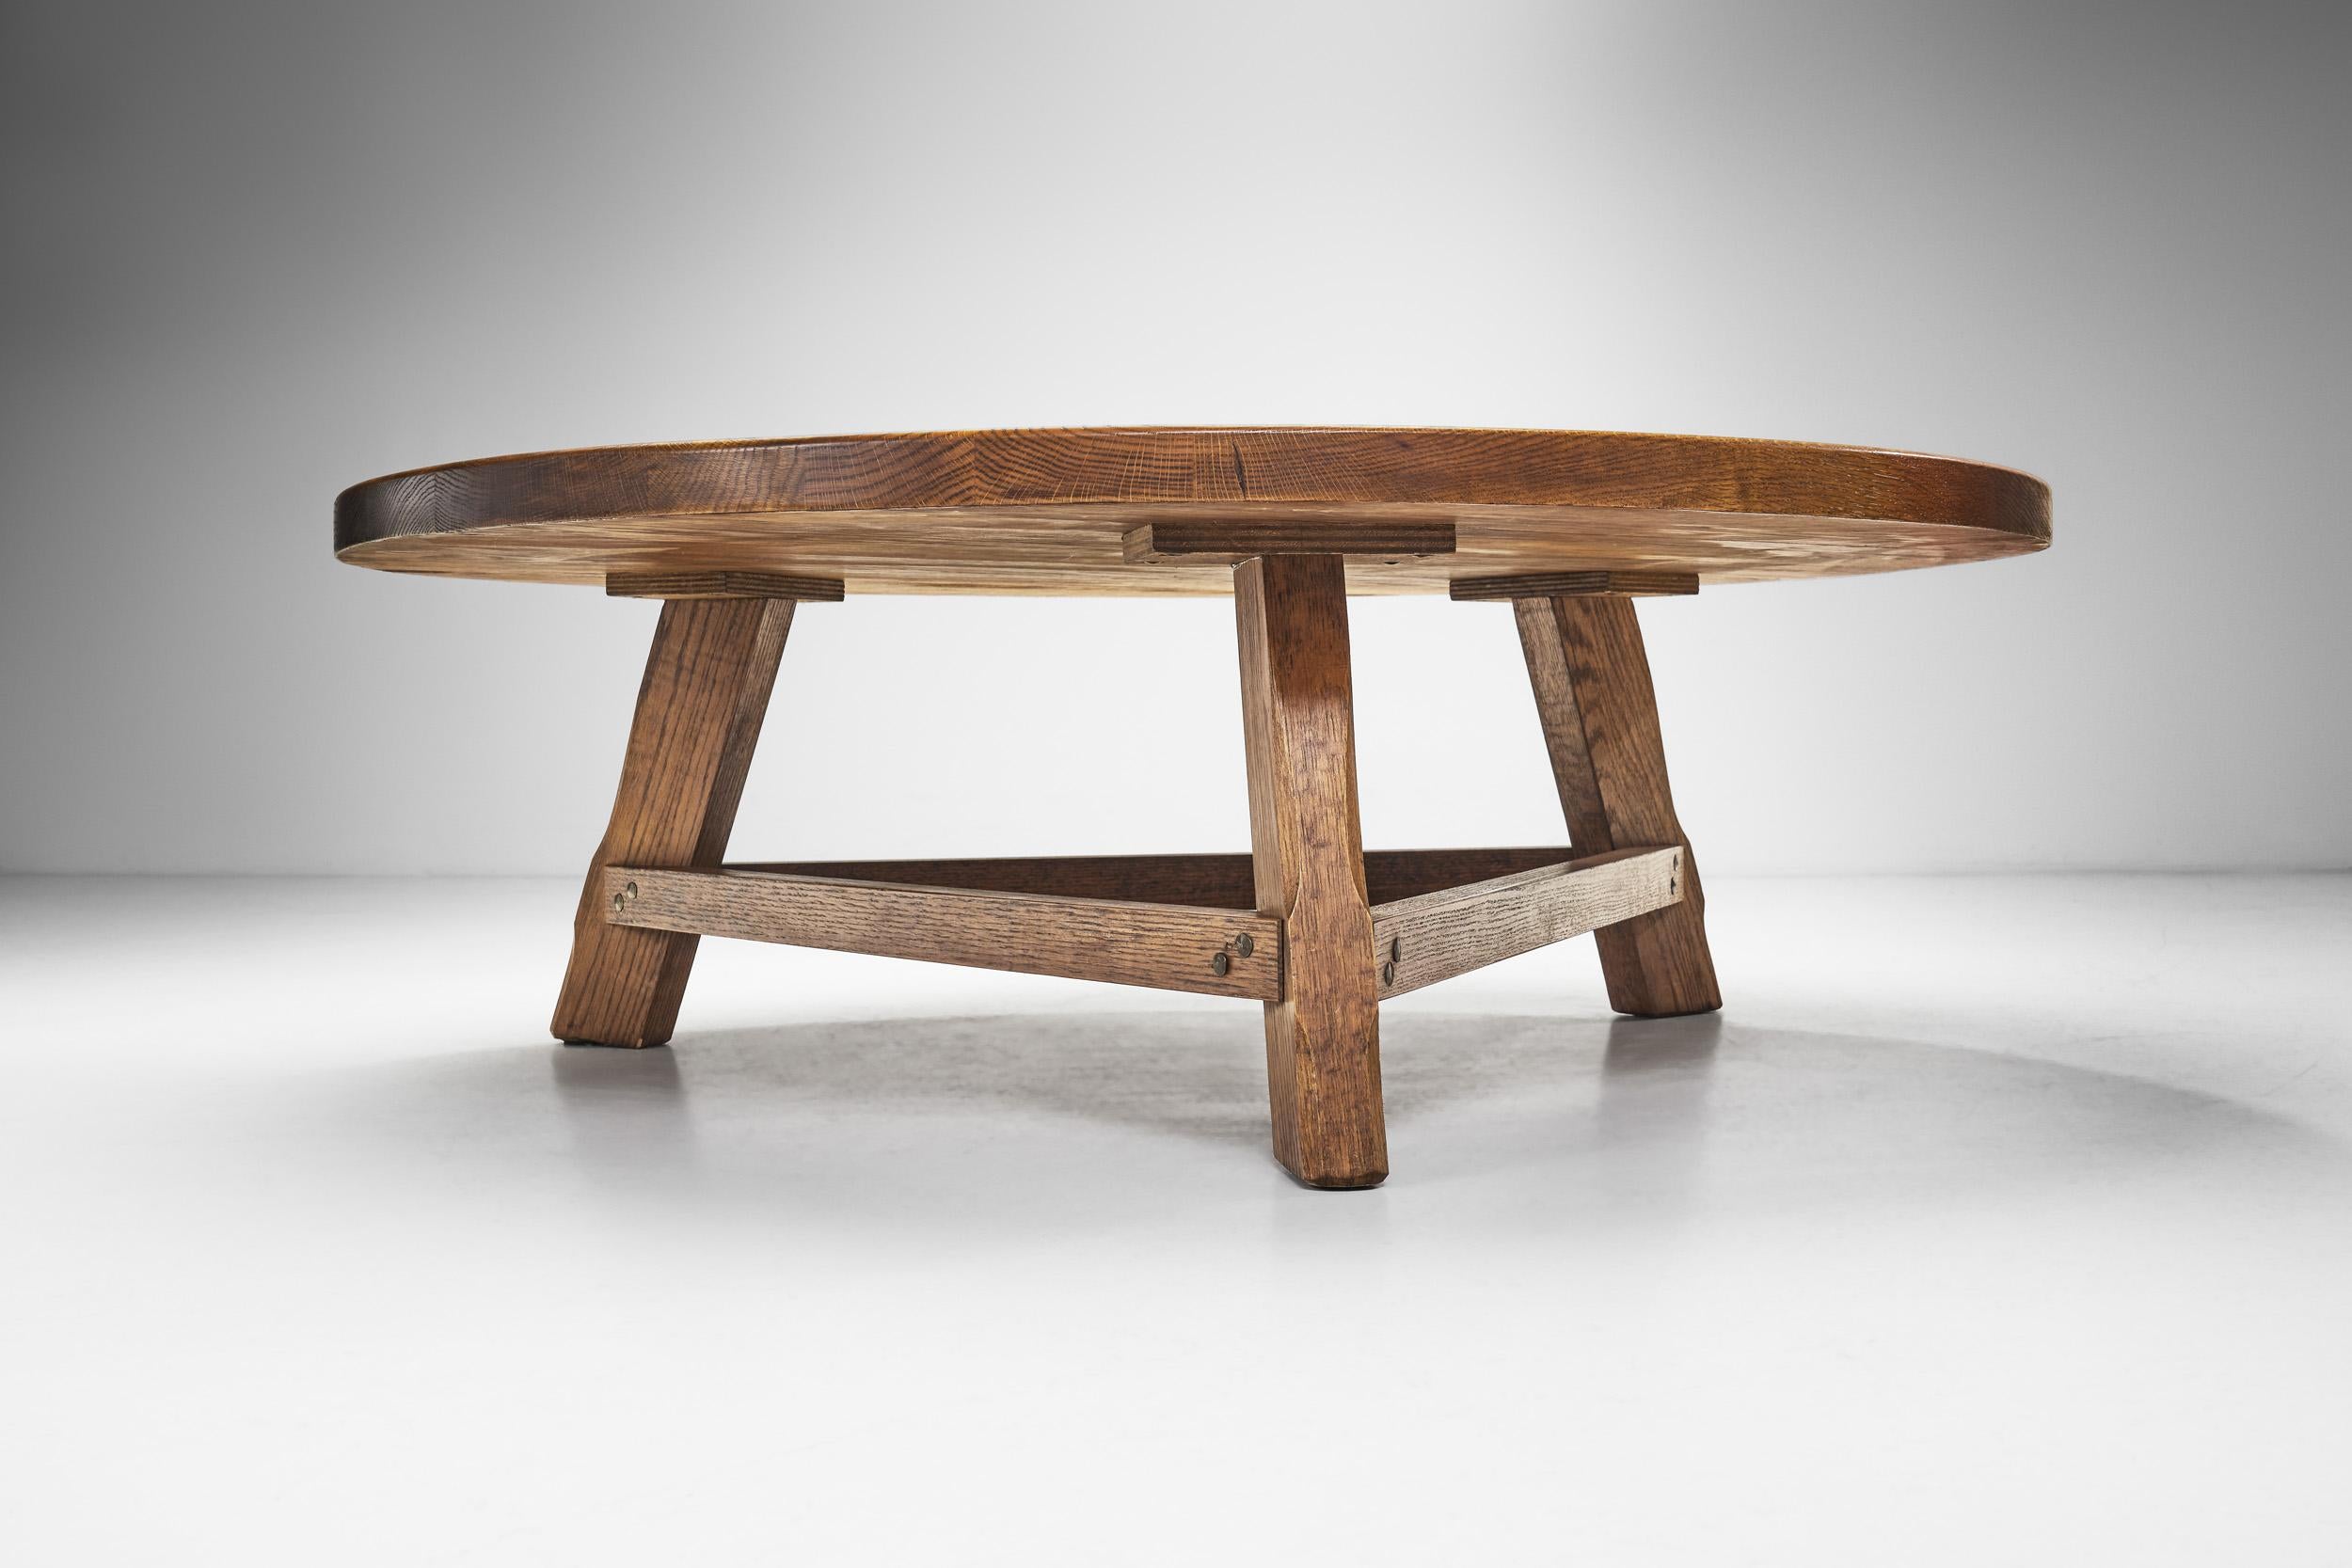 Brutalist Oak Coffee Table with Triangular Legs, Europe ca 1950s For Sale 7